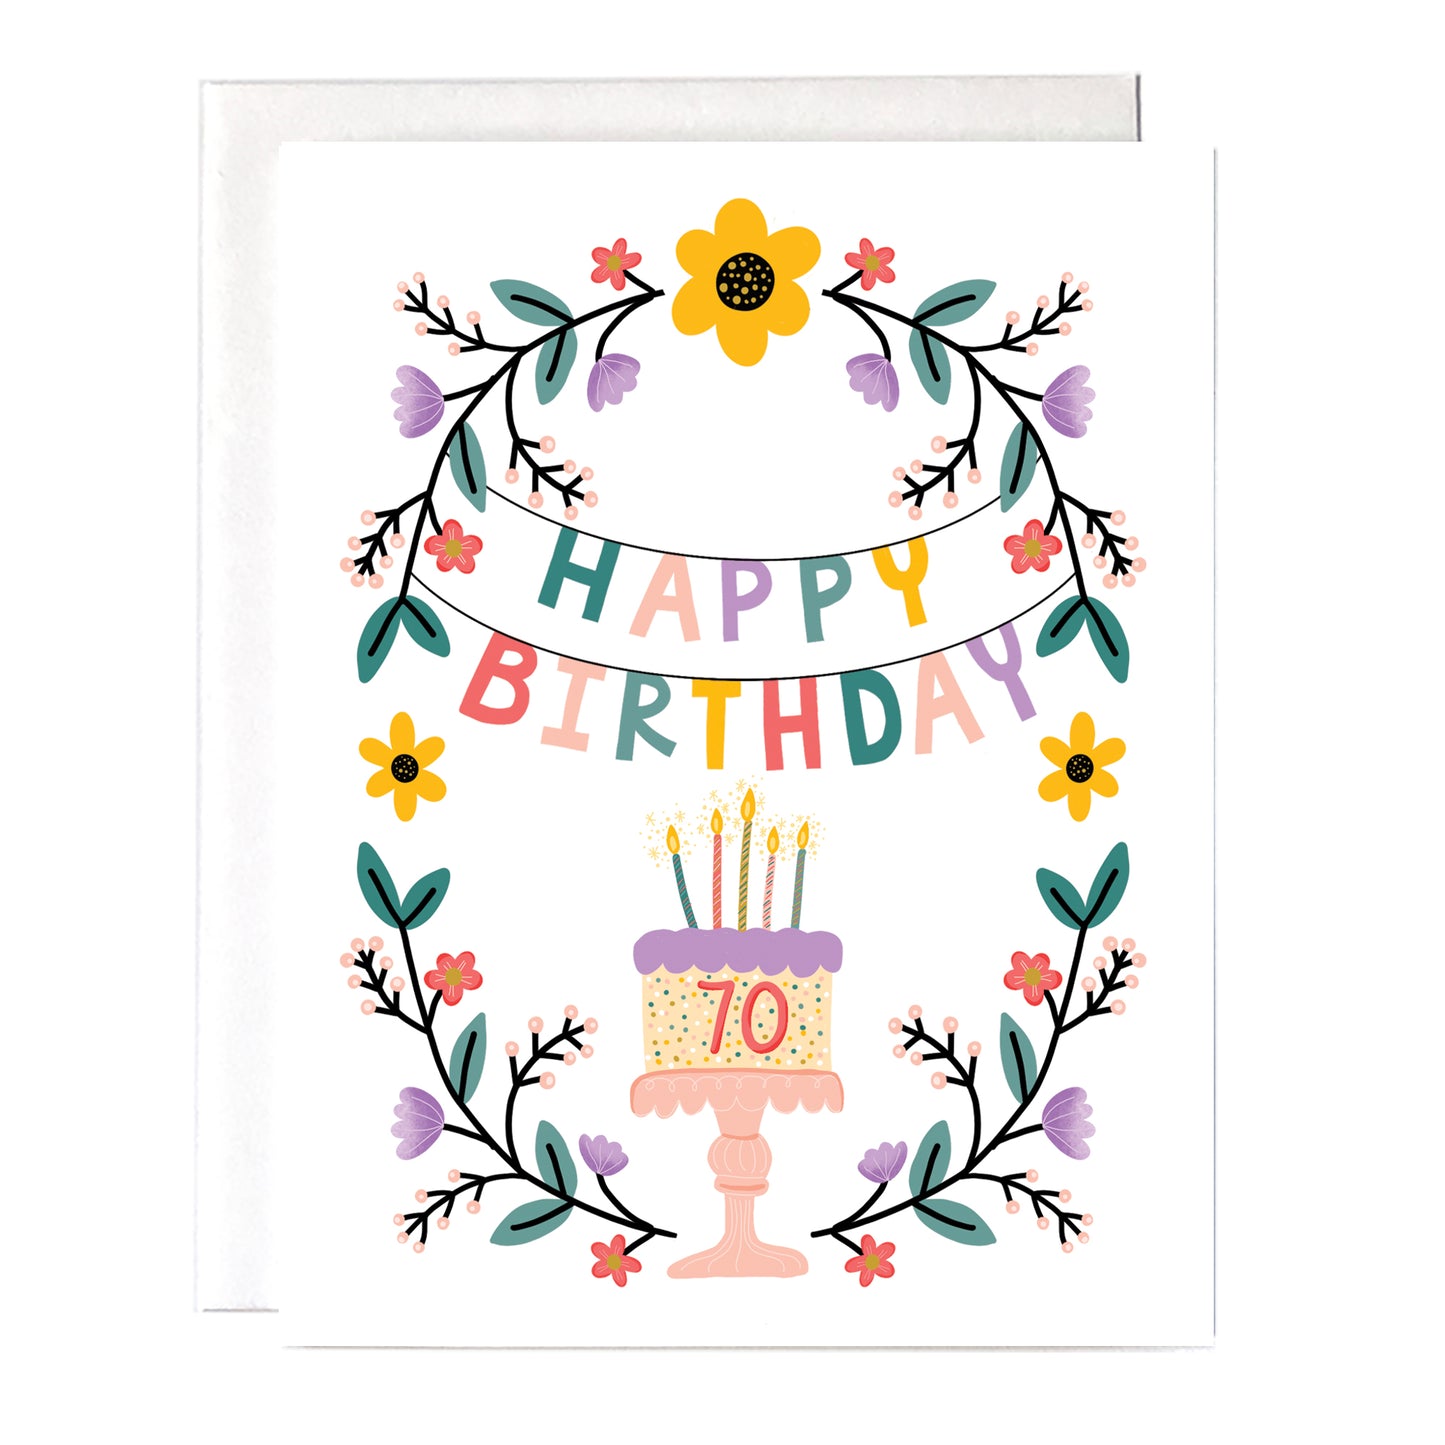 70th Birthday Card with beautiful floral design and birthday cake. Size A2 greeting card (4.25" x 5.5") with envelope, blank Inside. All cards are designed and Illustrated with love by me, Anna Fox, and are printed at my friendly neighborhood print shop in Denver, CO.